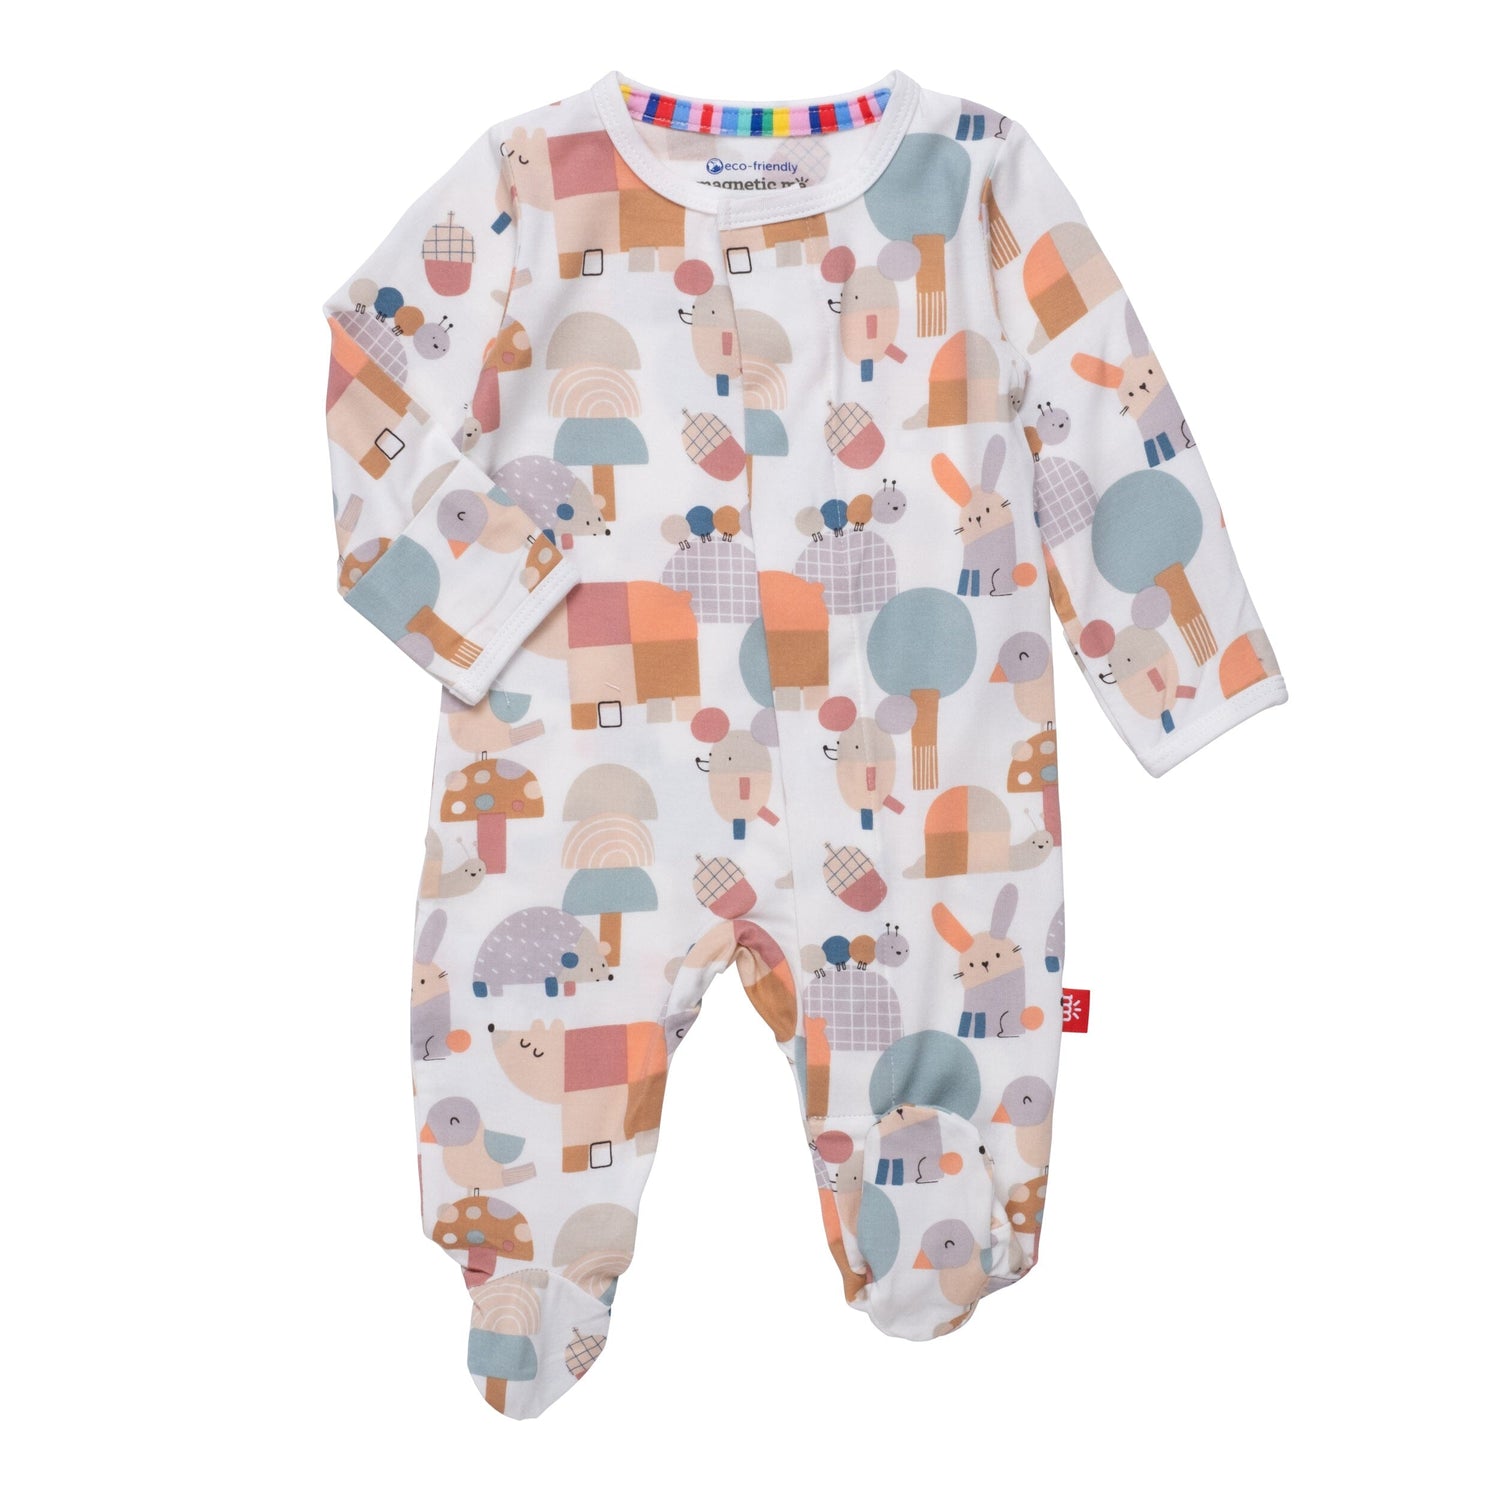 Willow Grove Footie 120 BABY GIRLS APPAREL Magnetic Me NB 